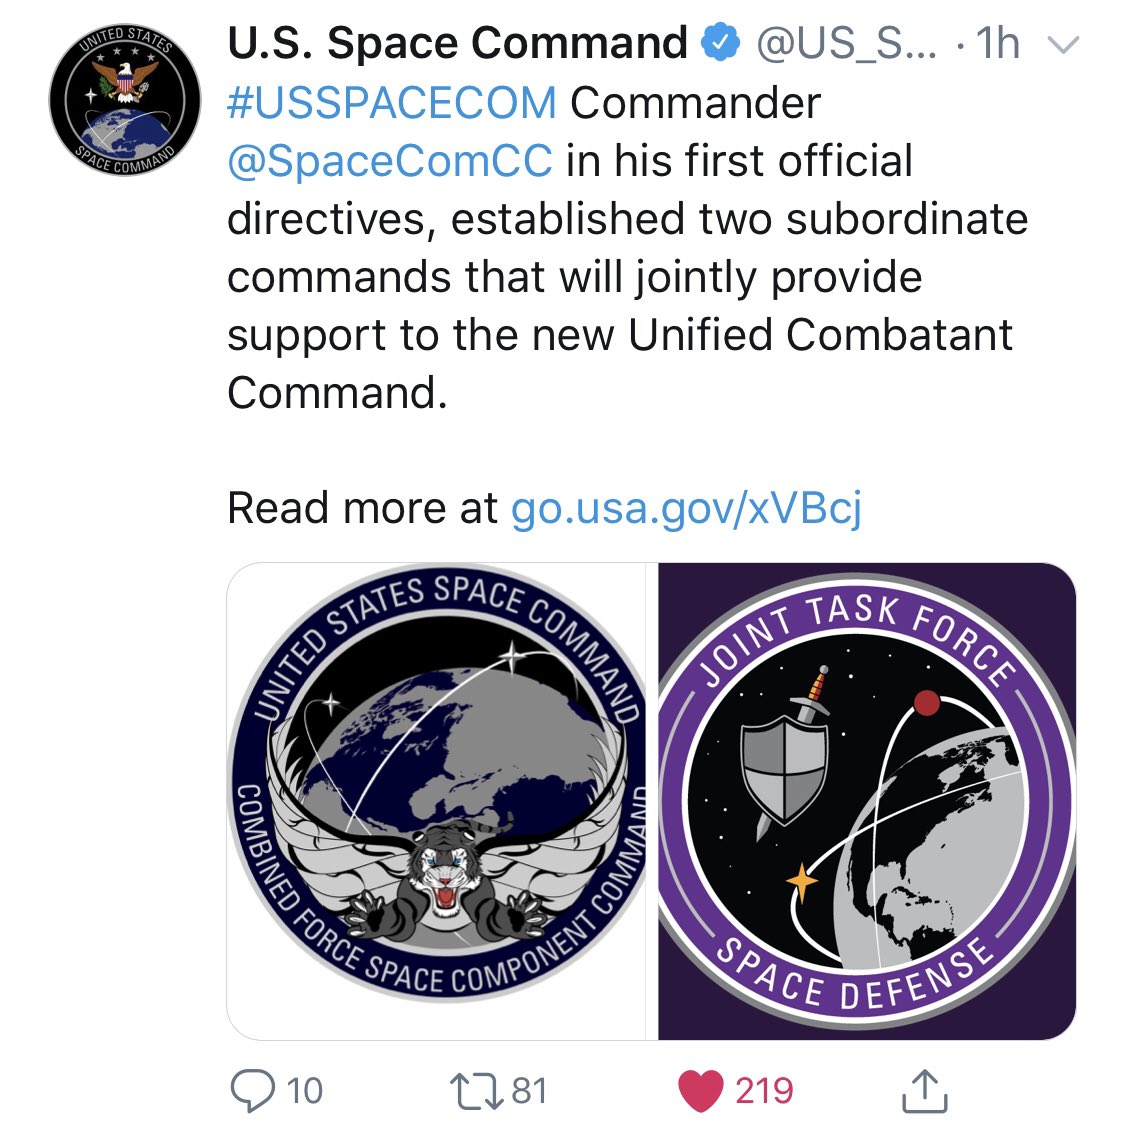  #USSPACECOM Commander @SpaceComCC in his first official directives, established two subordinate commands that will jointly provide support to the new Unified Combatant Command. Read more at  http://go.usa.gov/xVBcj 